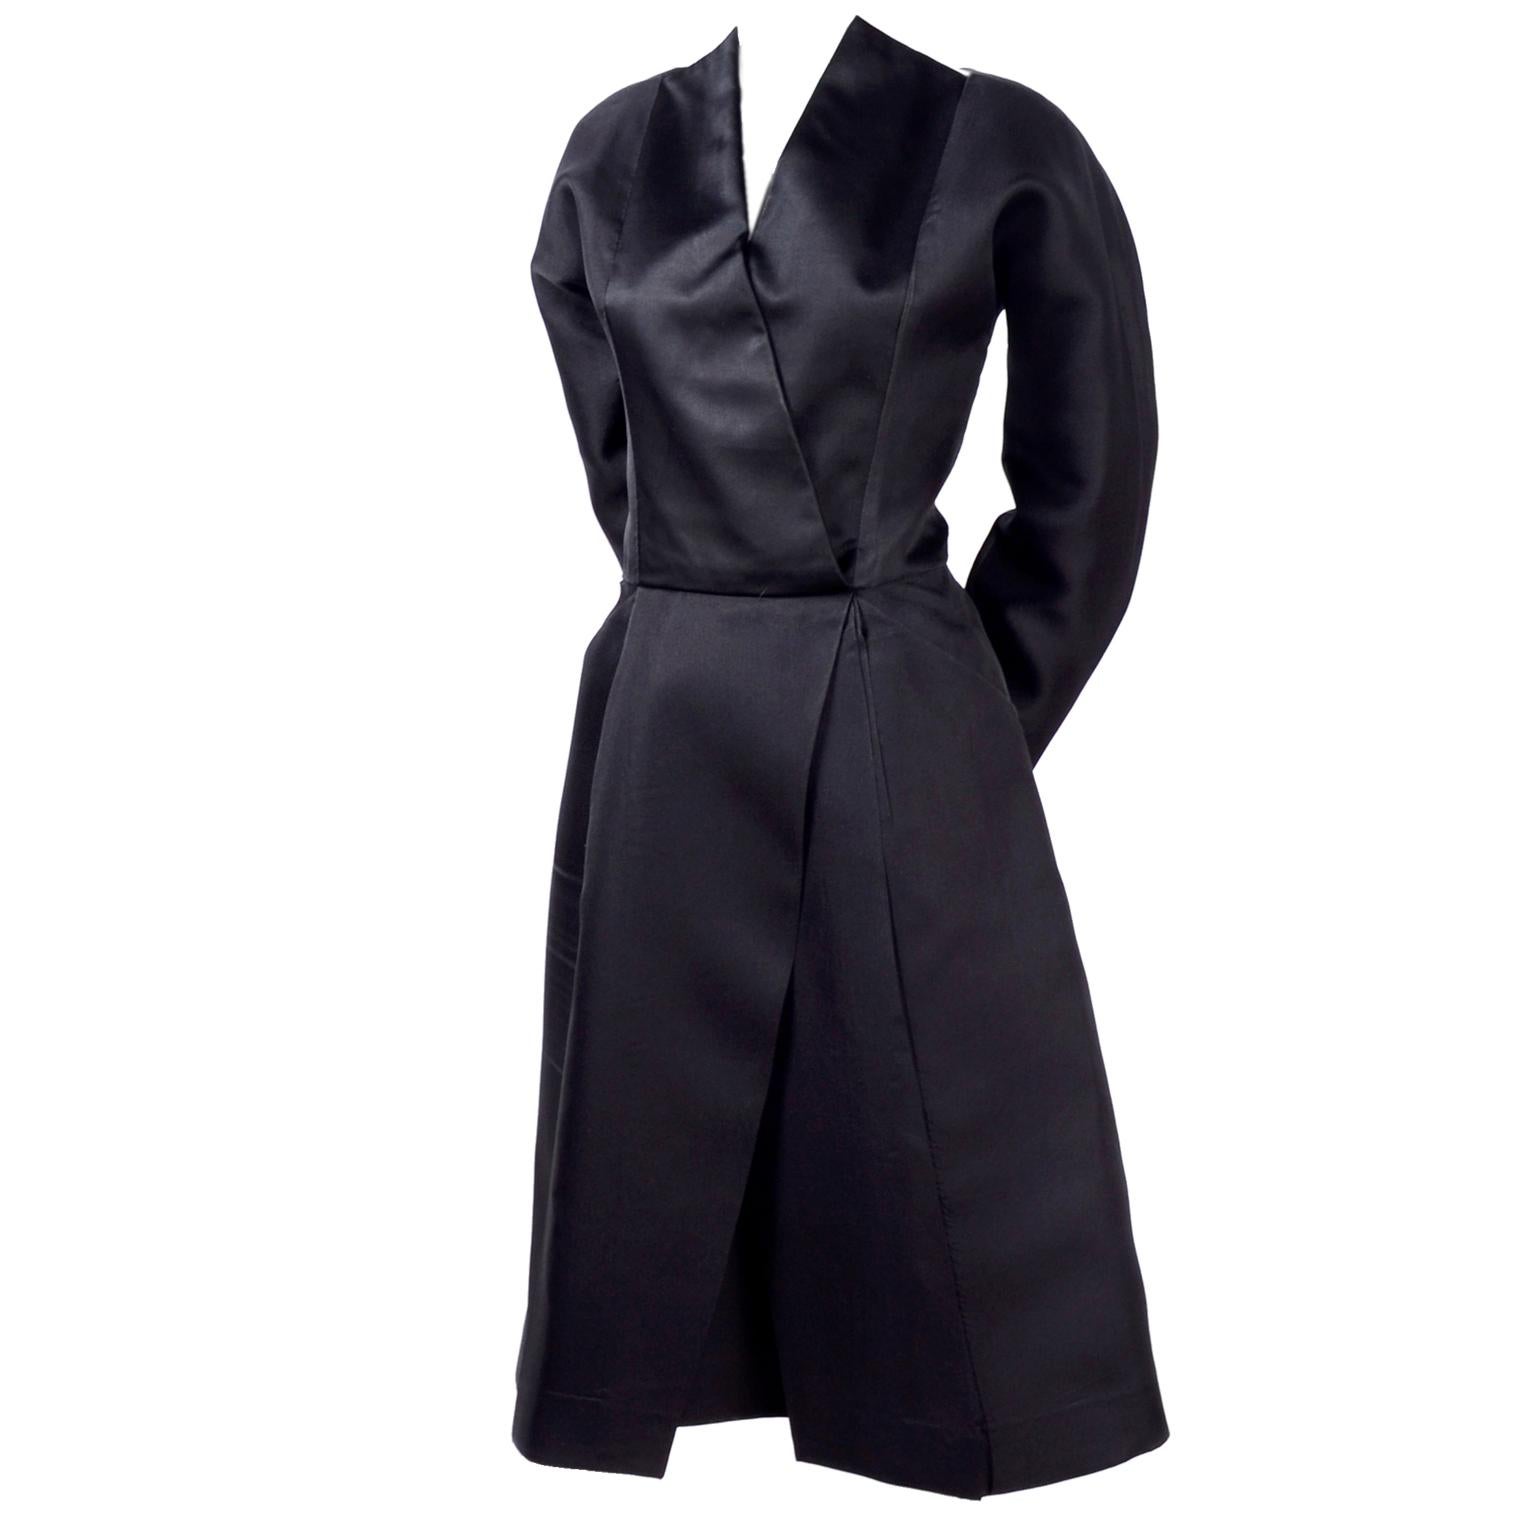 This is a late 1970's or early 1980's Geoffrey Beene New York black vintage cocktail dress with a a unique neckline and an origami style design. There are black satin panels that cross in front, meeting at the waistline to open up in two large